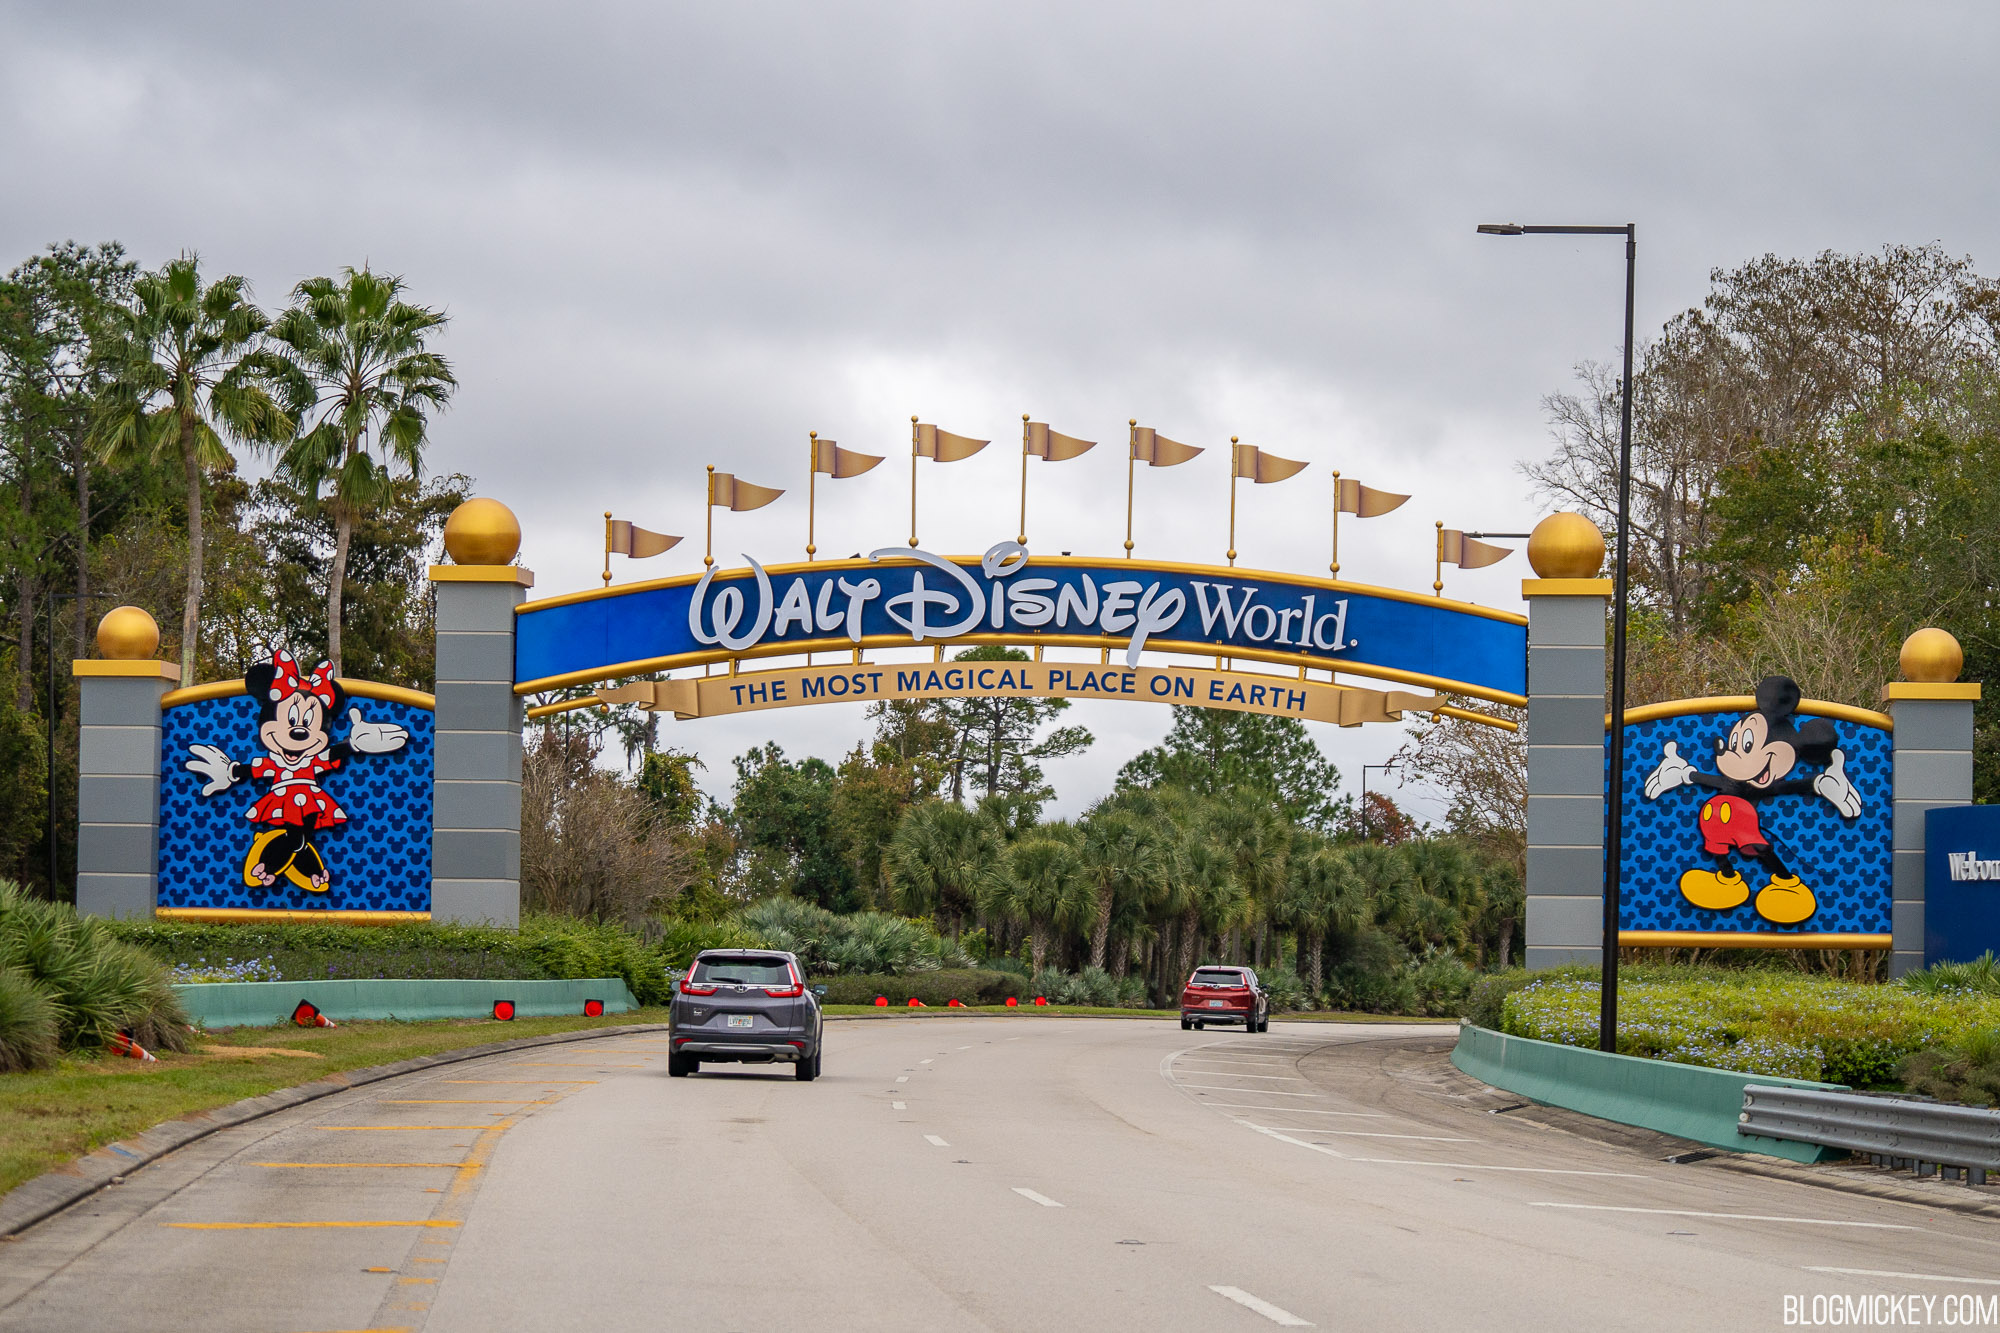 best disney world vacation packages 2021